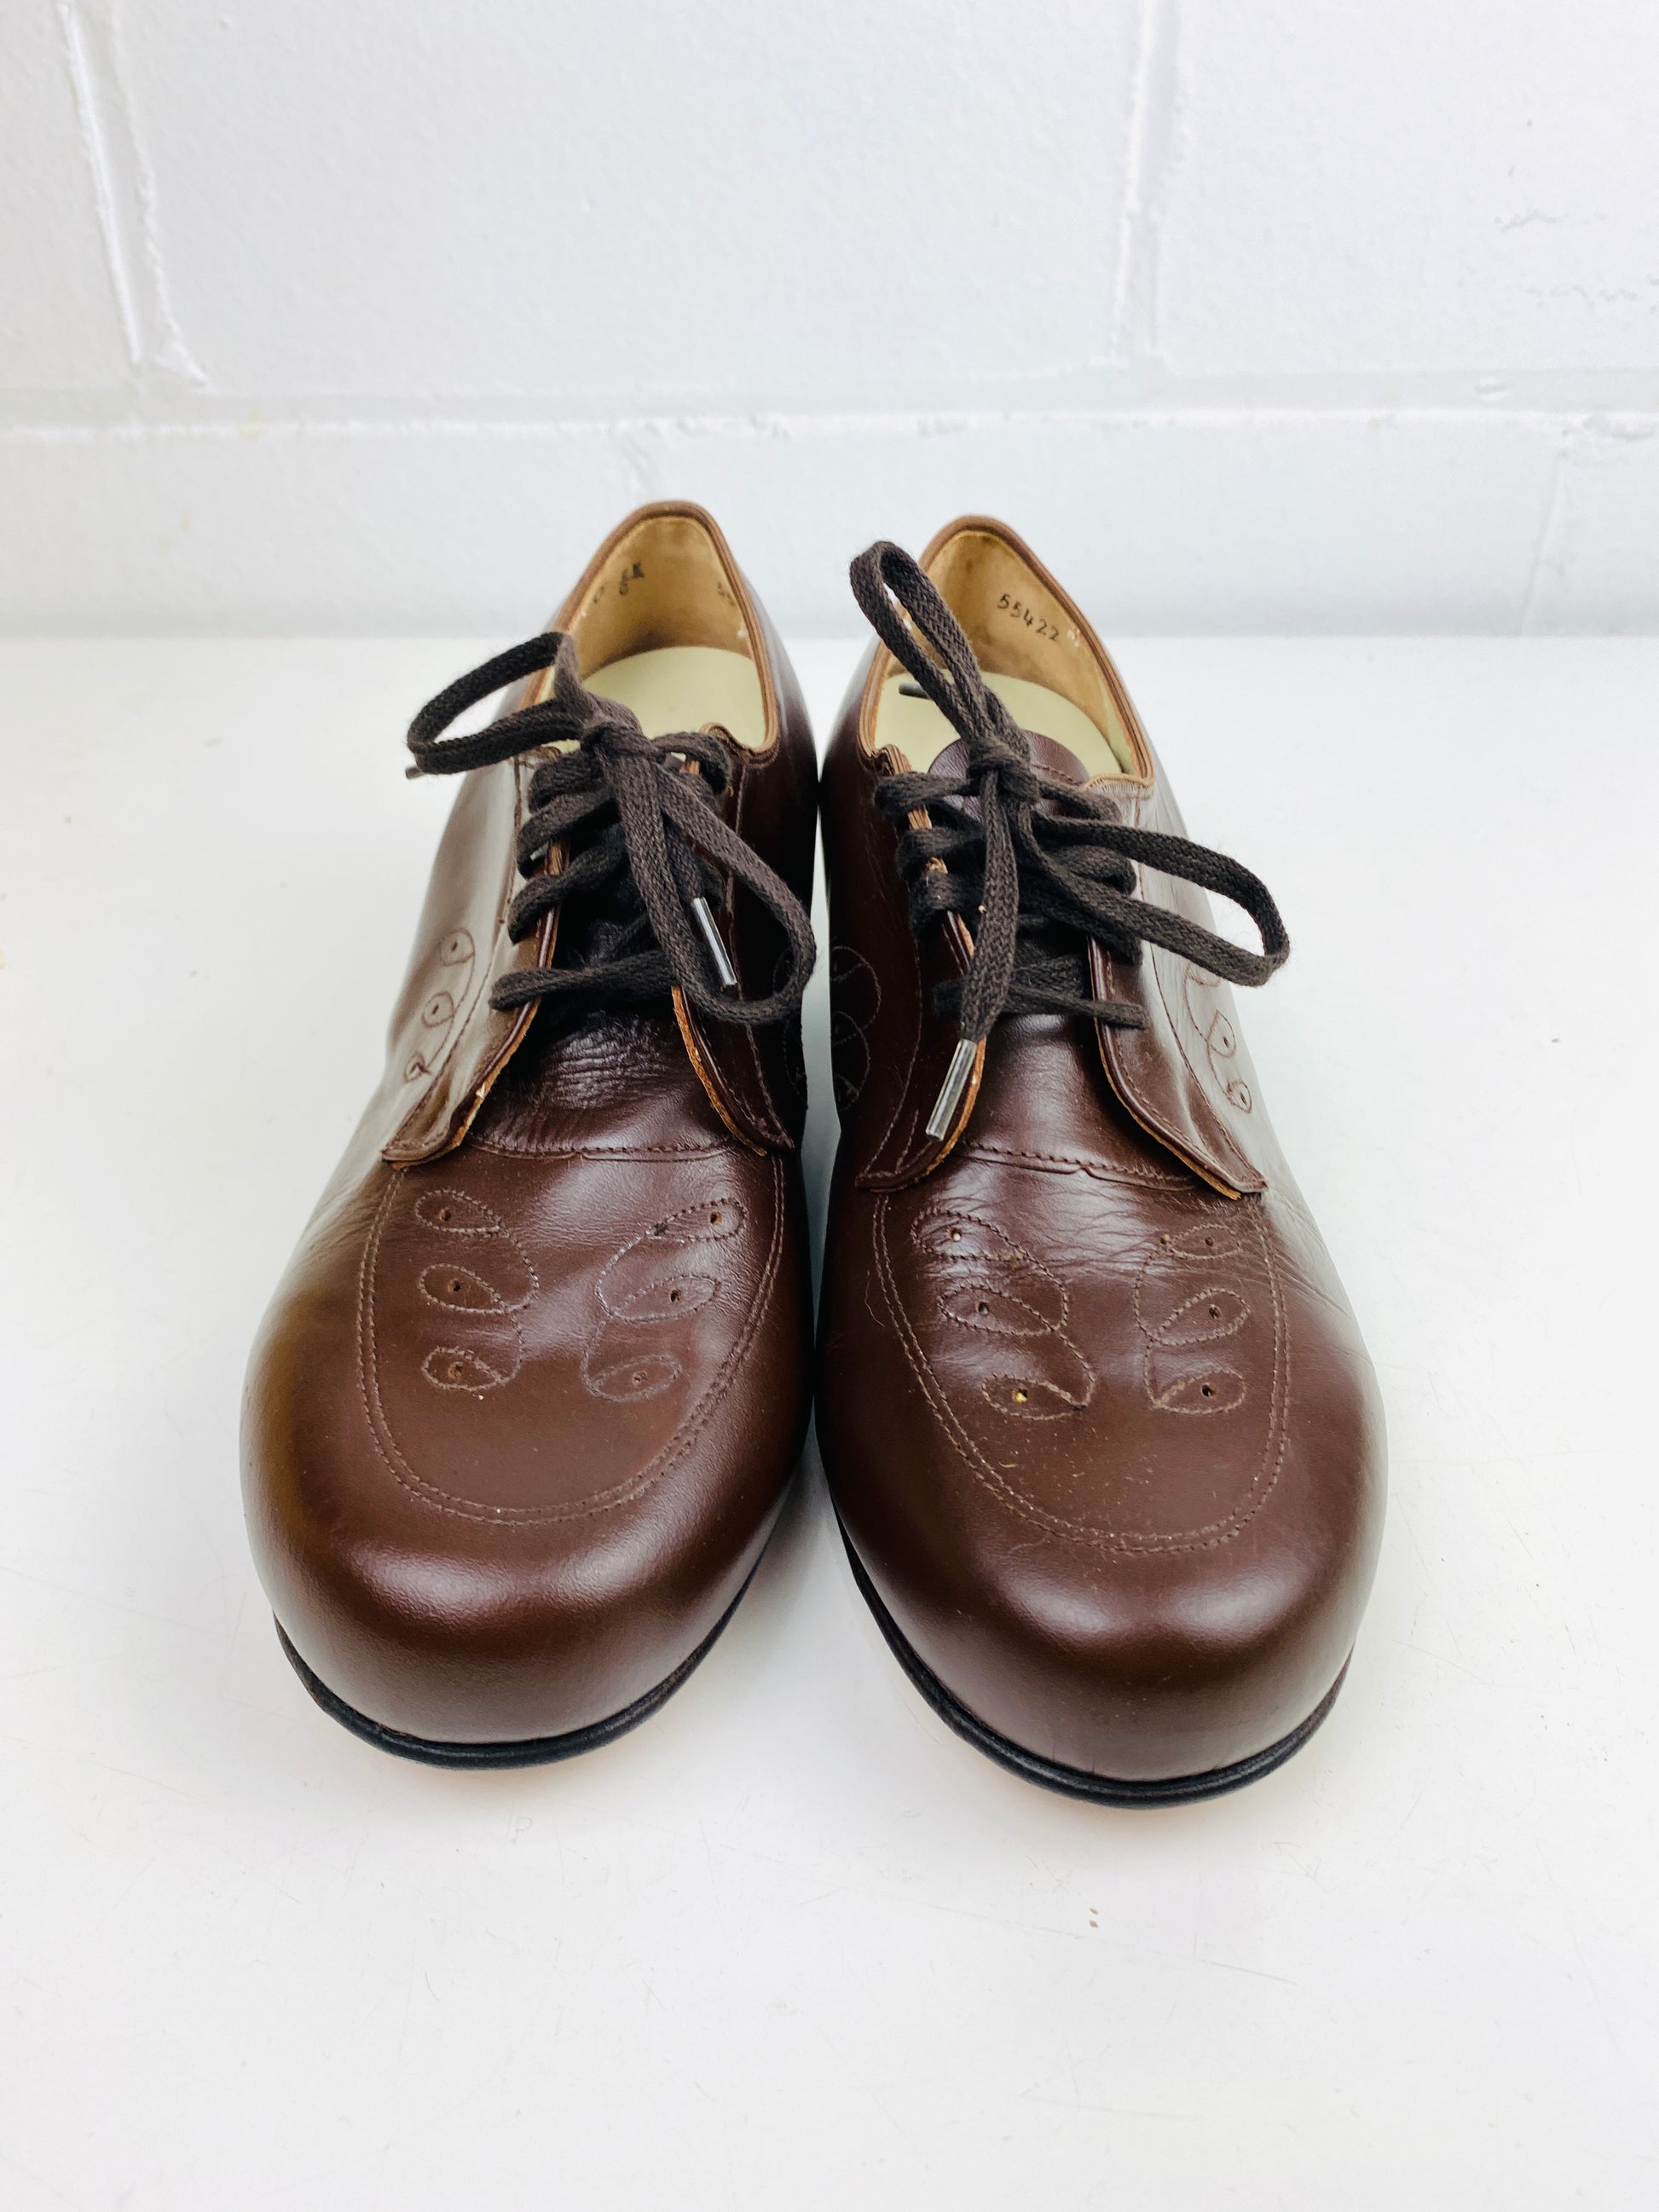 Vintage Deadstock Shoes, Women's 1980s Brown Leather Oxford's, Cuban Heels, NOS